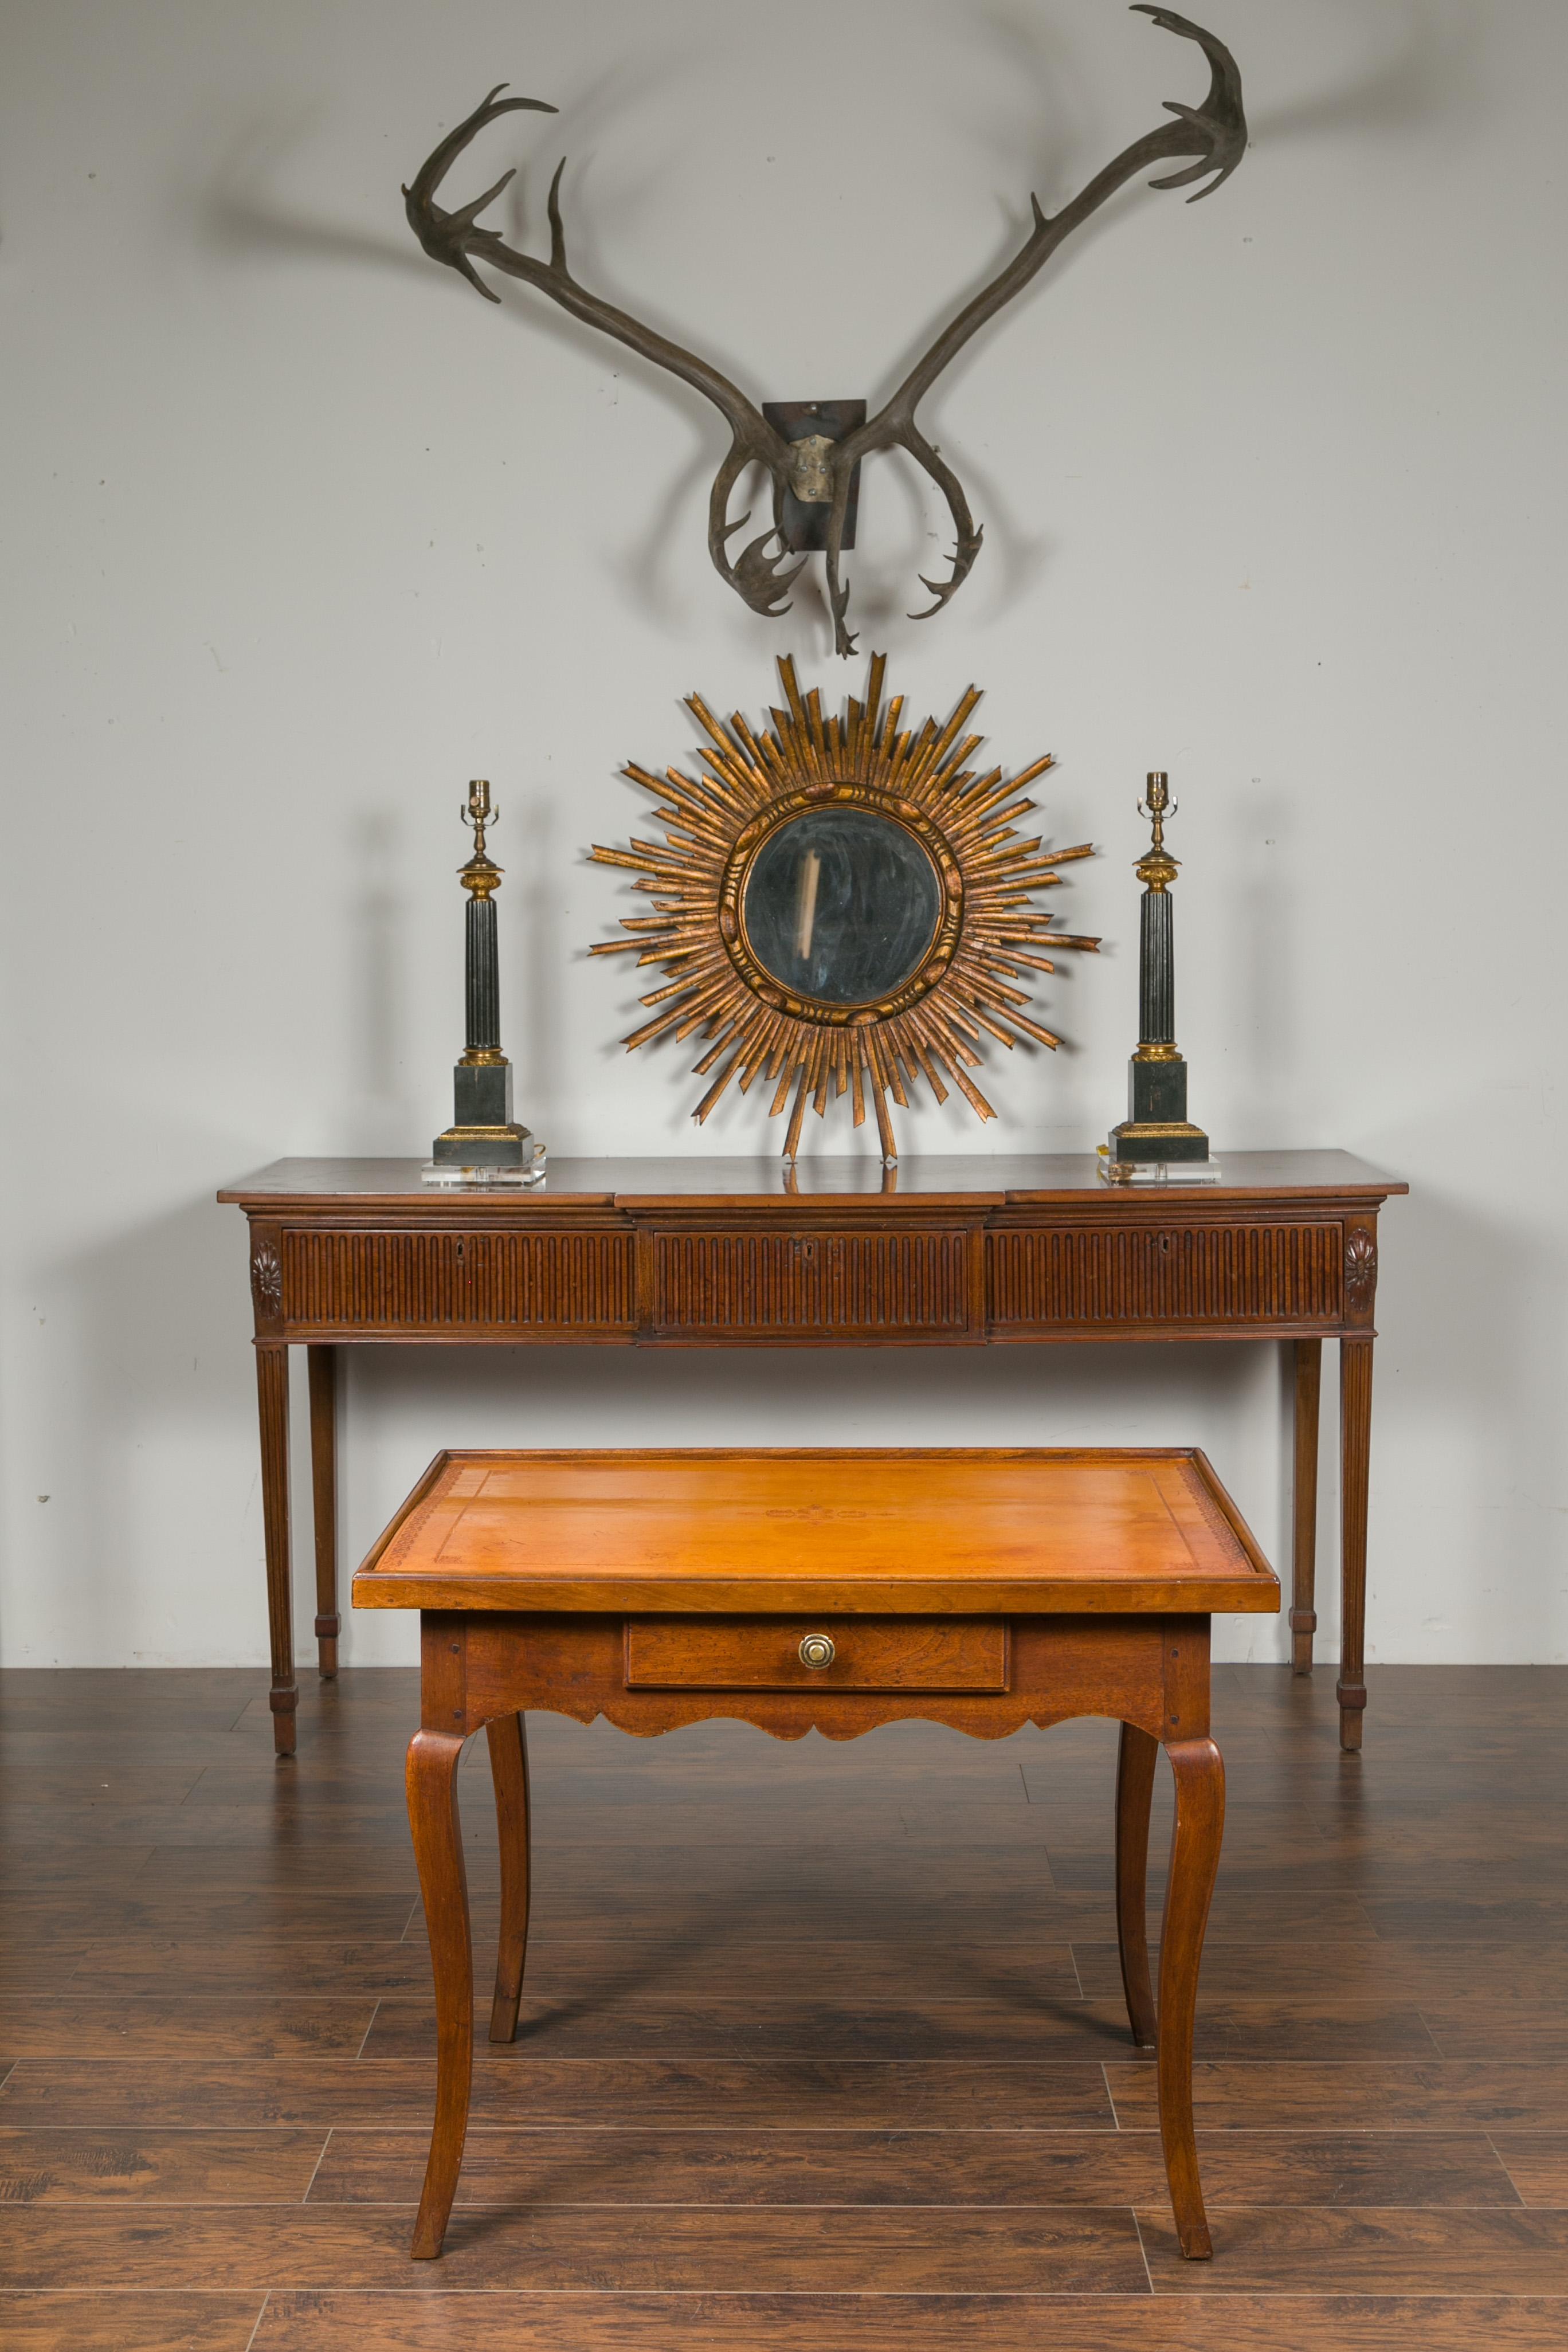 A French Napoleon III period walnut table from the mid-19th century, with leather top and single drawer. Created in France during the 1850s, this walnut table features a rectangular tooled leather top sitting above an apron scalloped on all sides